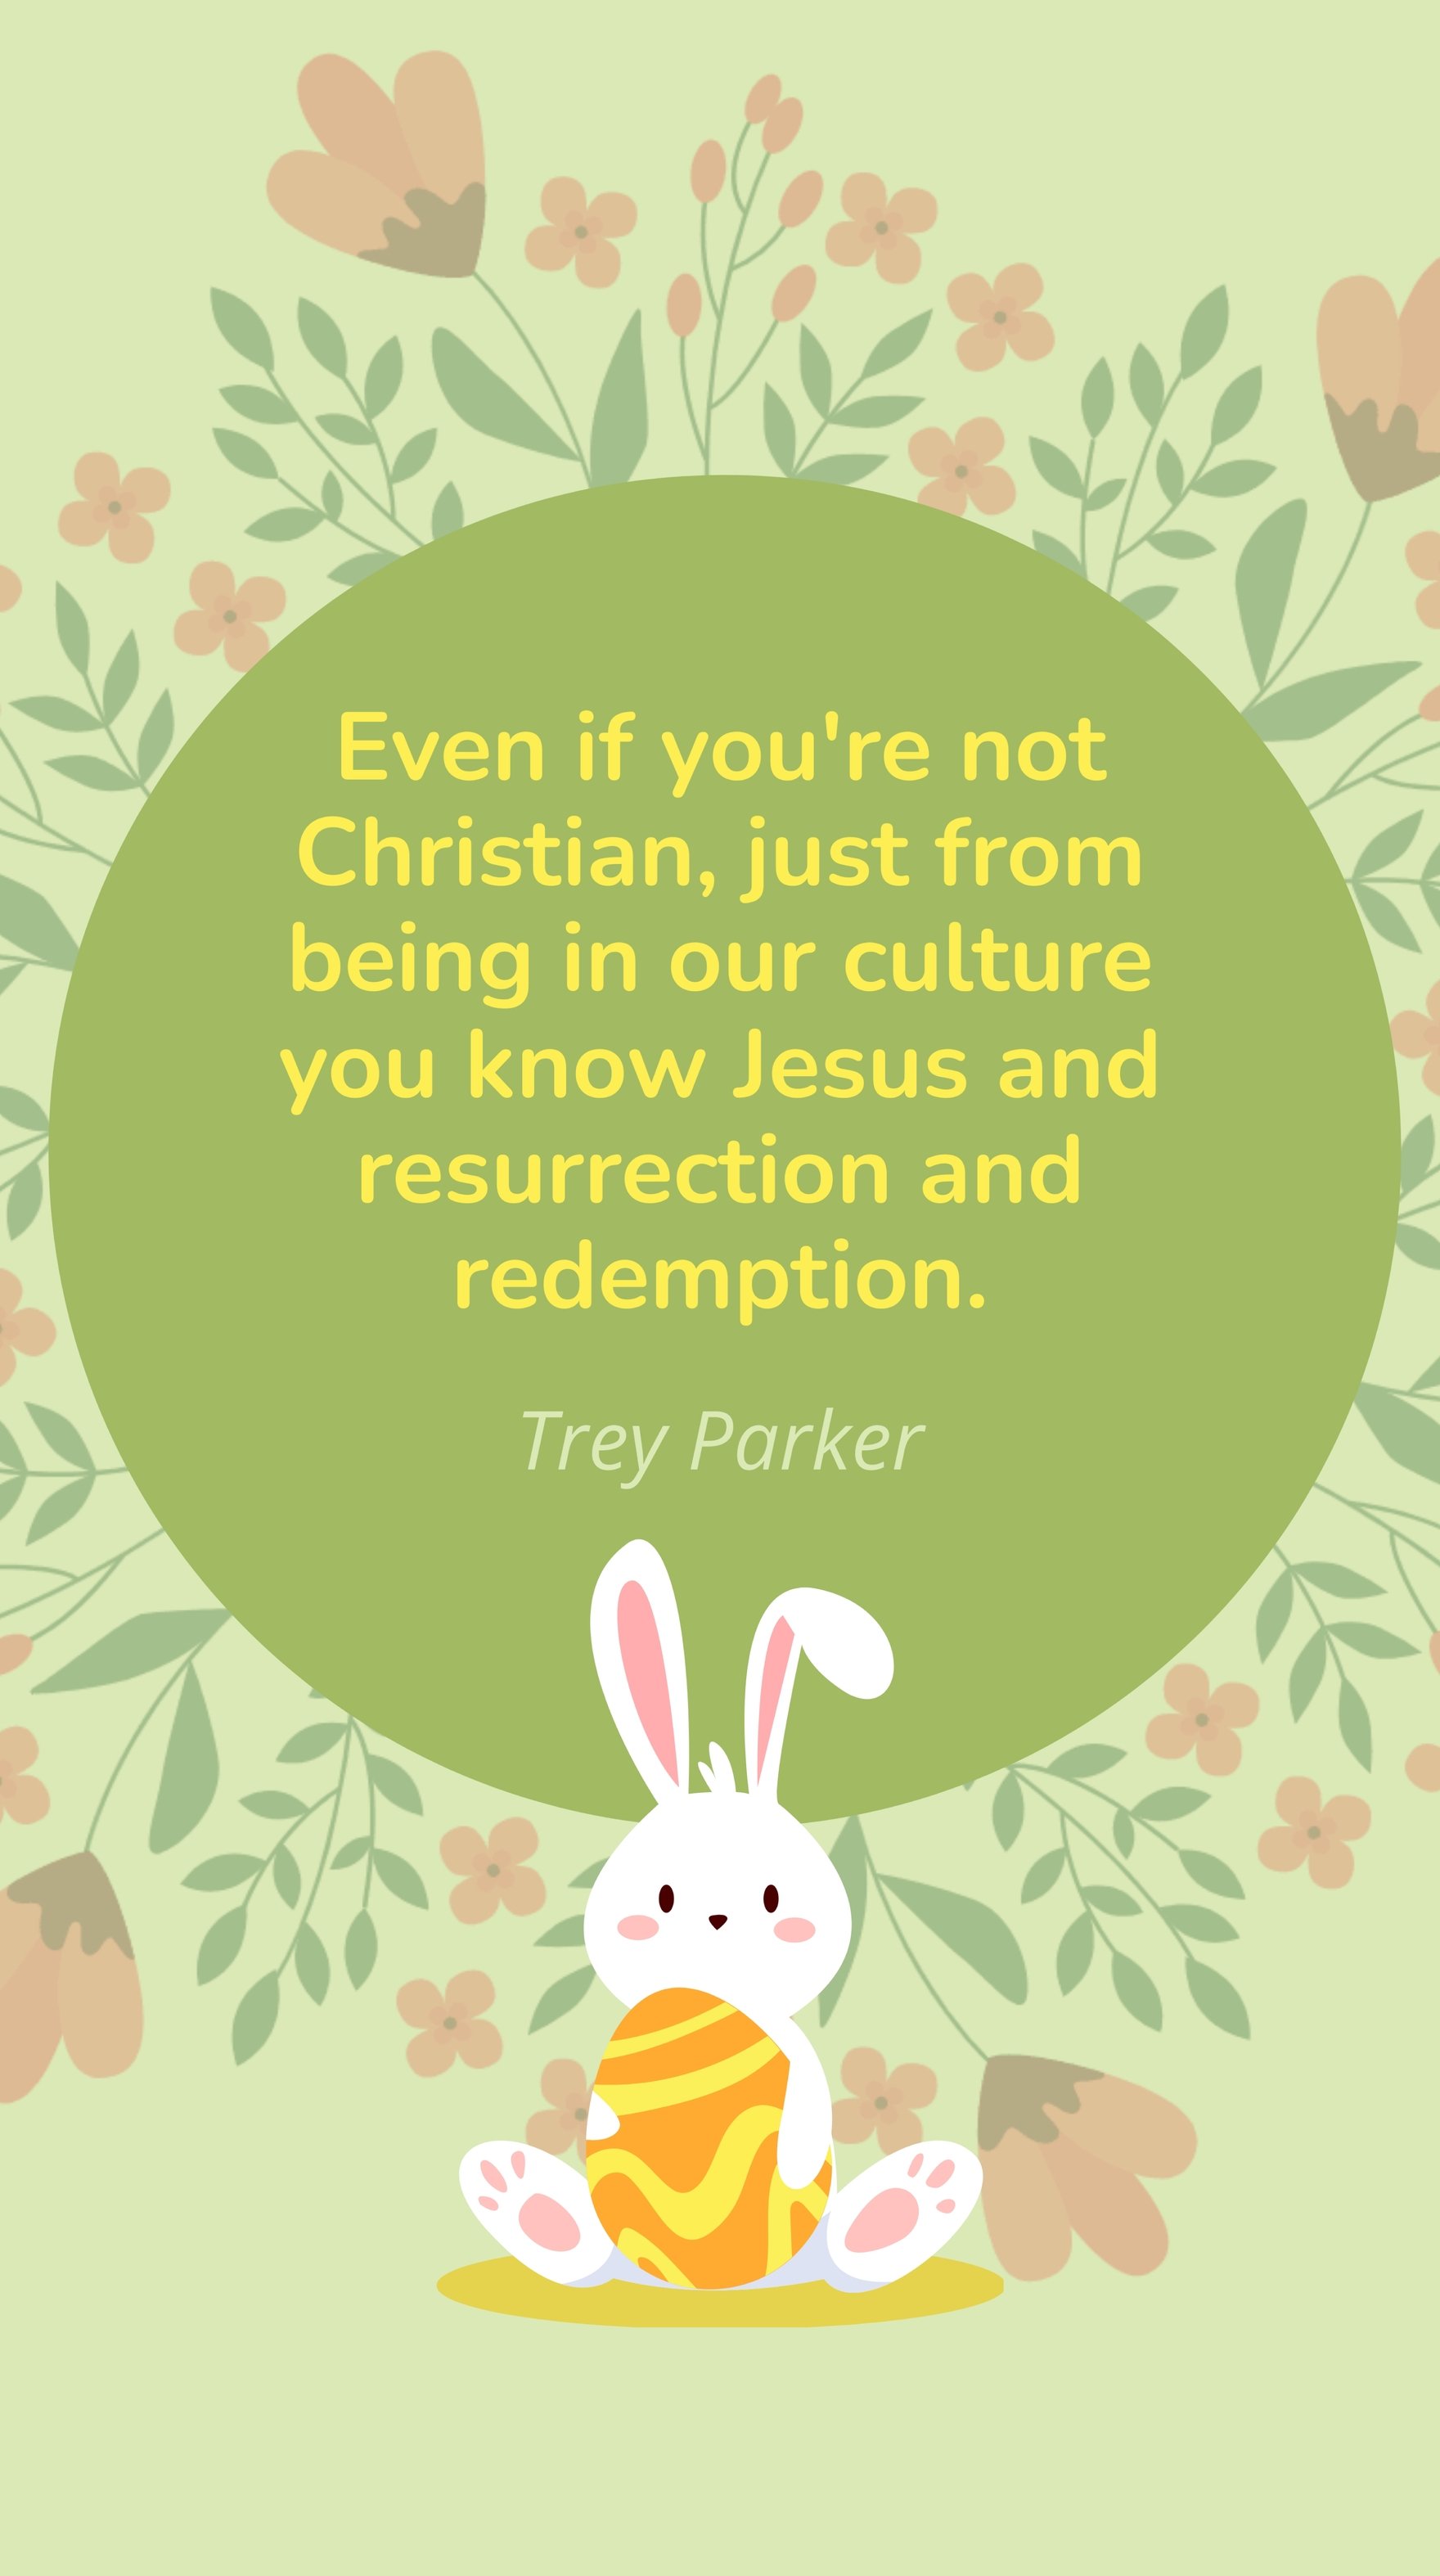 Free Trey Parker - Even if you're not Christian, just from being in our culture you know Jesus and resurrection and redemption.